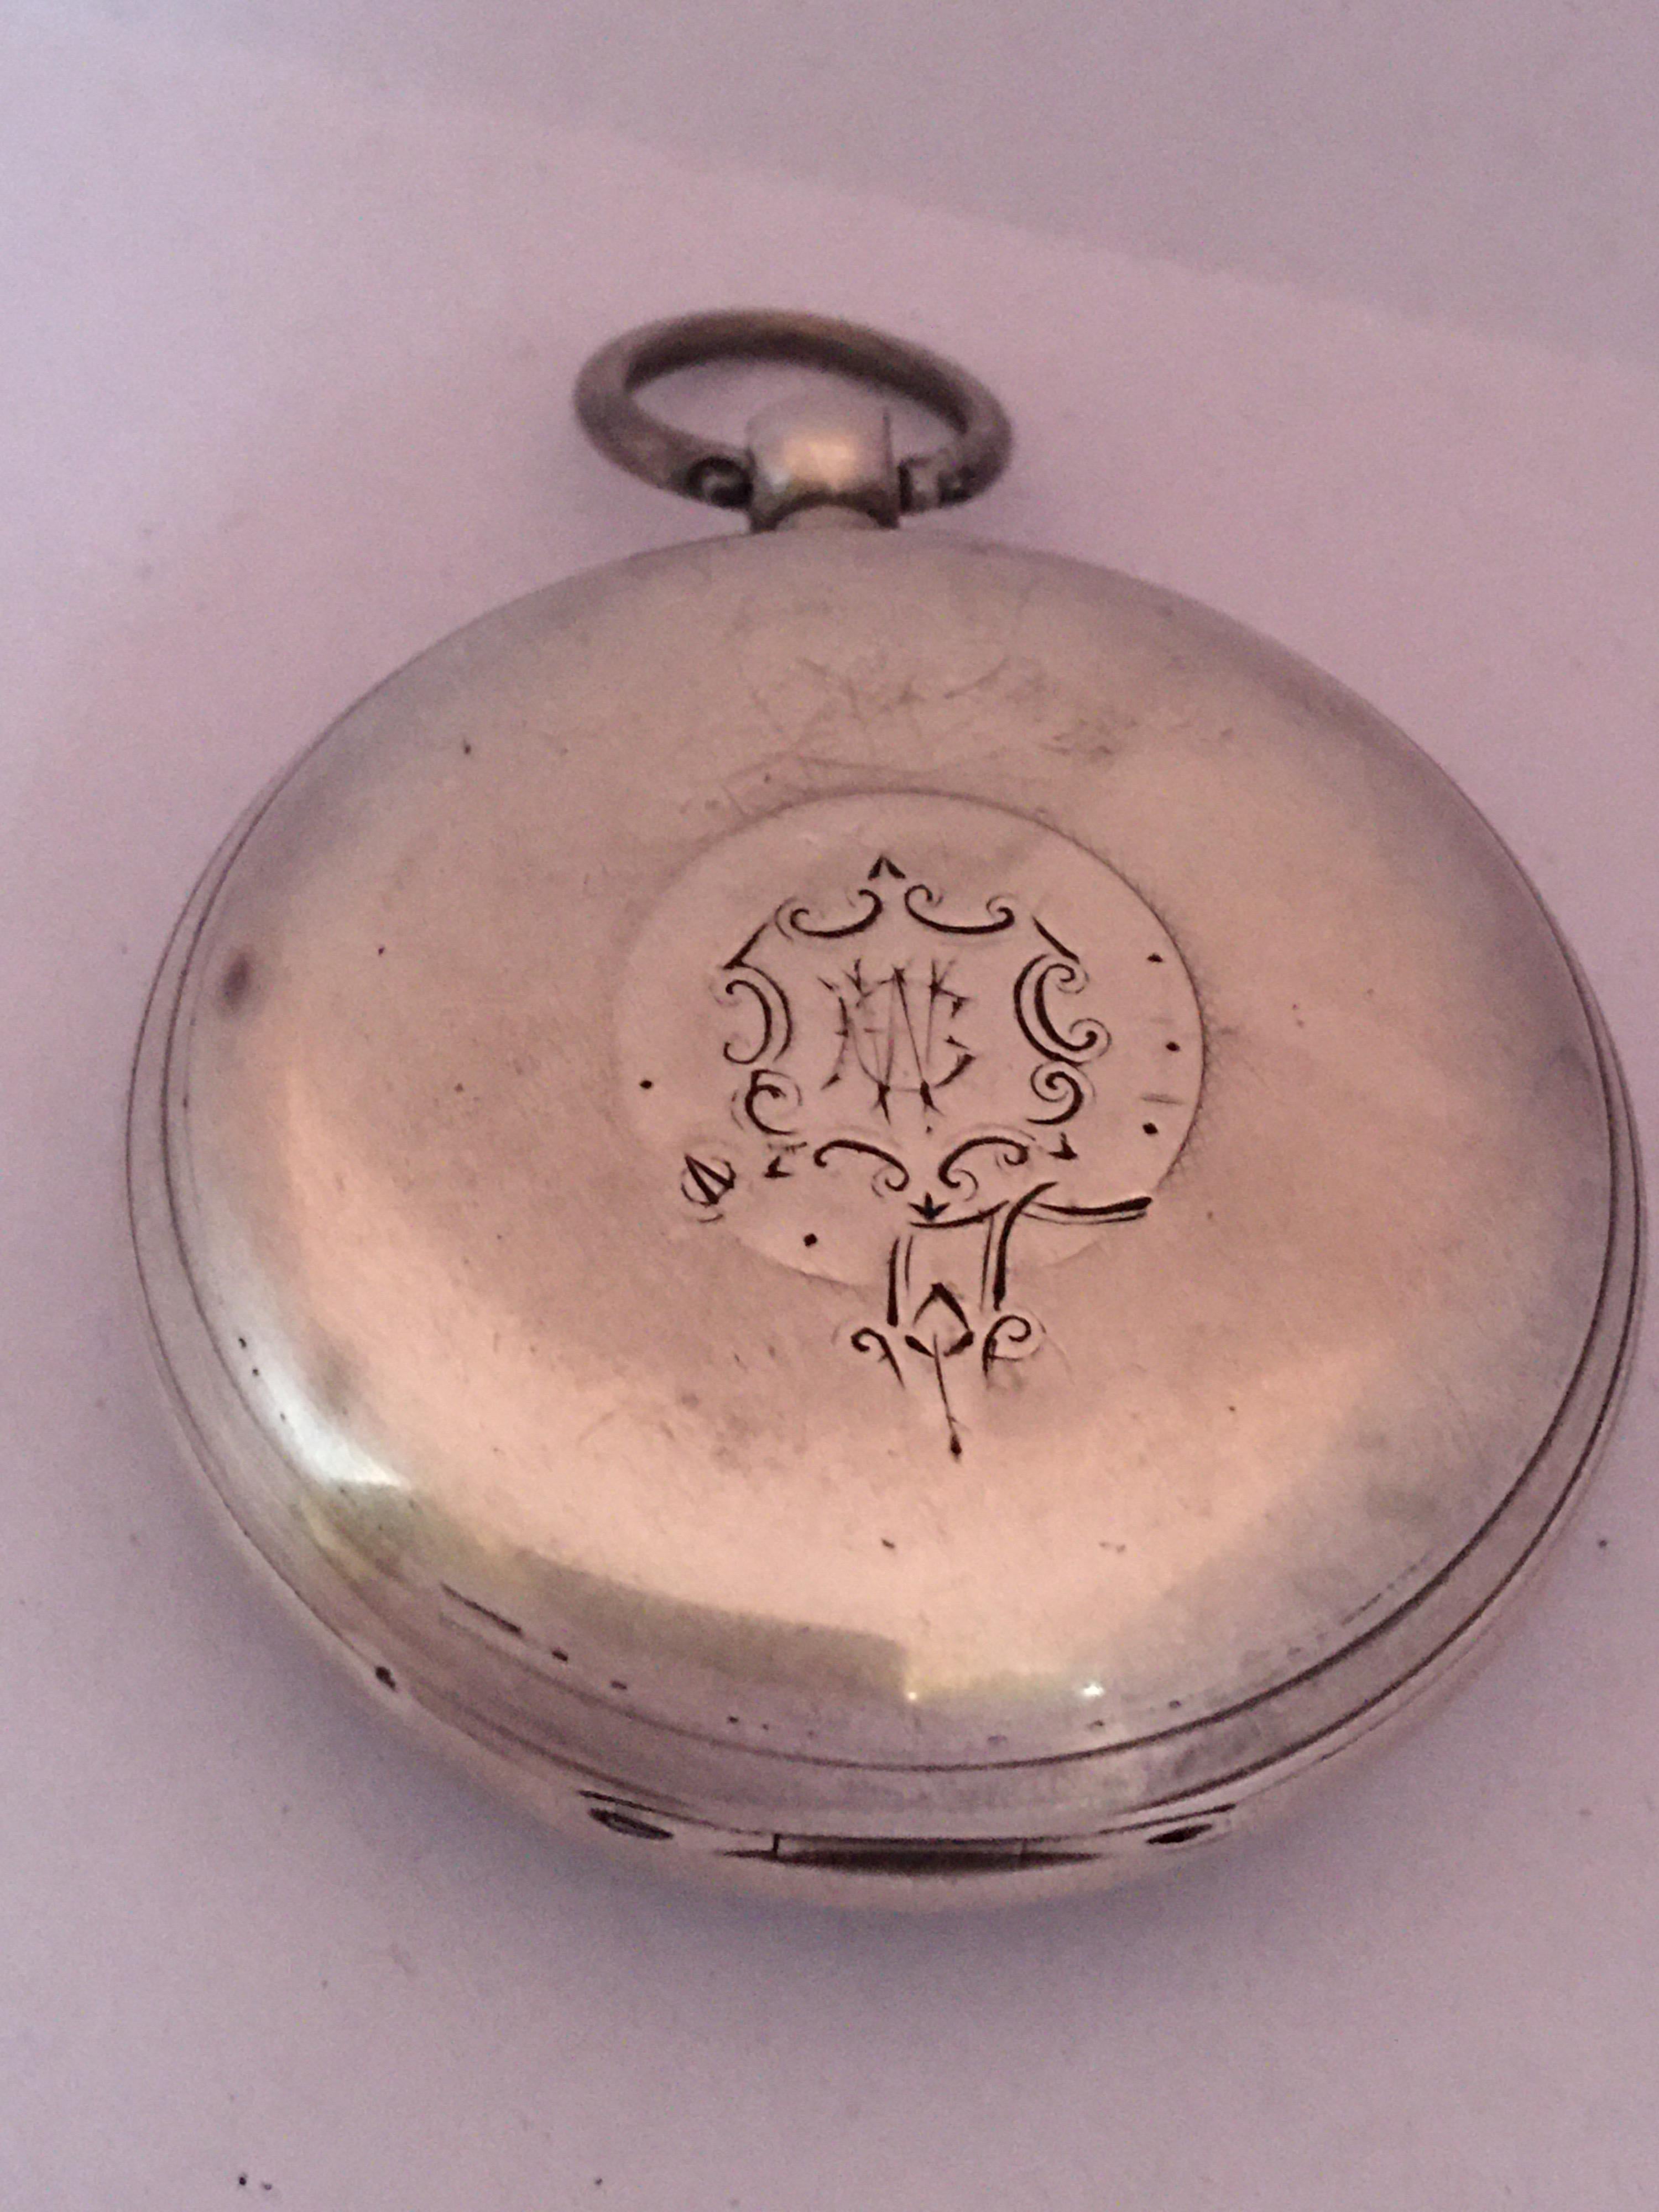 This beautiful antique key winding 52mm diameter silver pocket watch is in good working condition and it is running well. Visible signs of ageing and wear with light scratches on the glass and on the watch case as shown. Some tiny dents on the watch